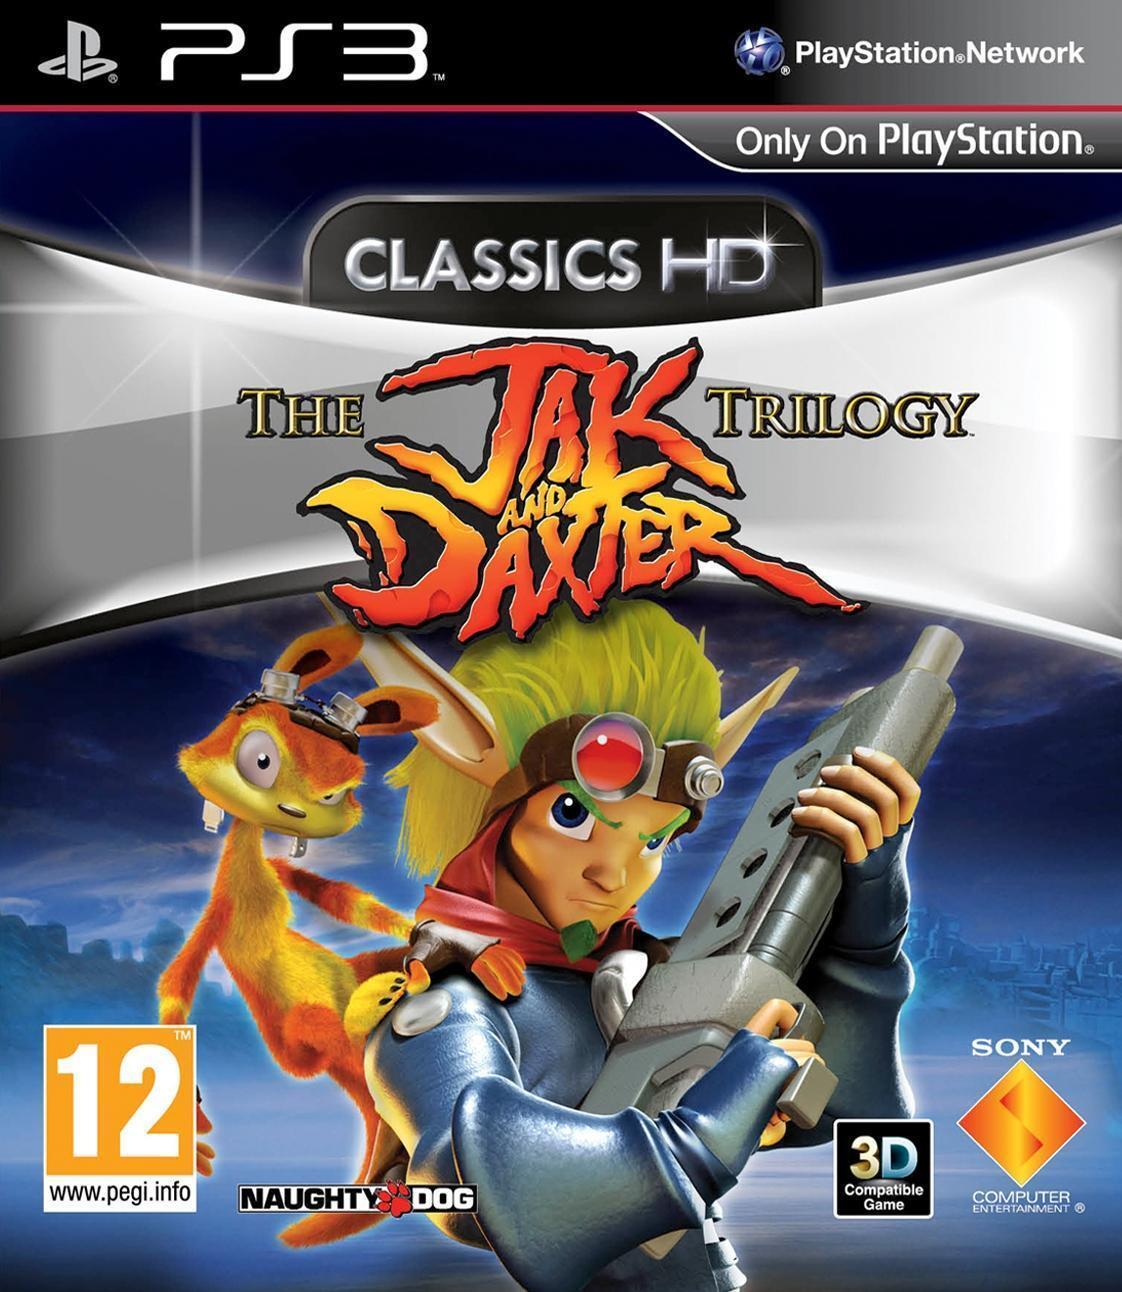 Sony The Jak and Daxter Trilogy PlayStation 3